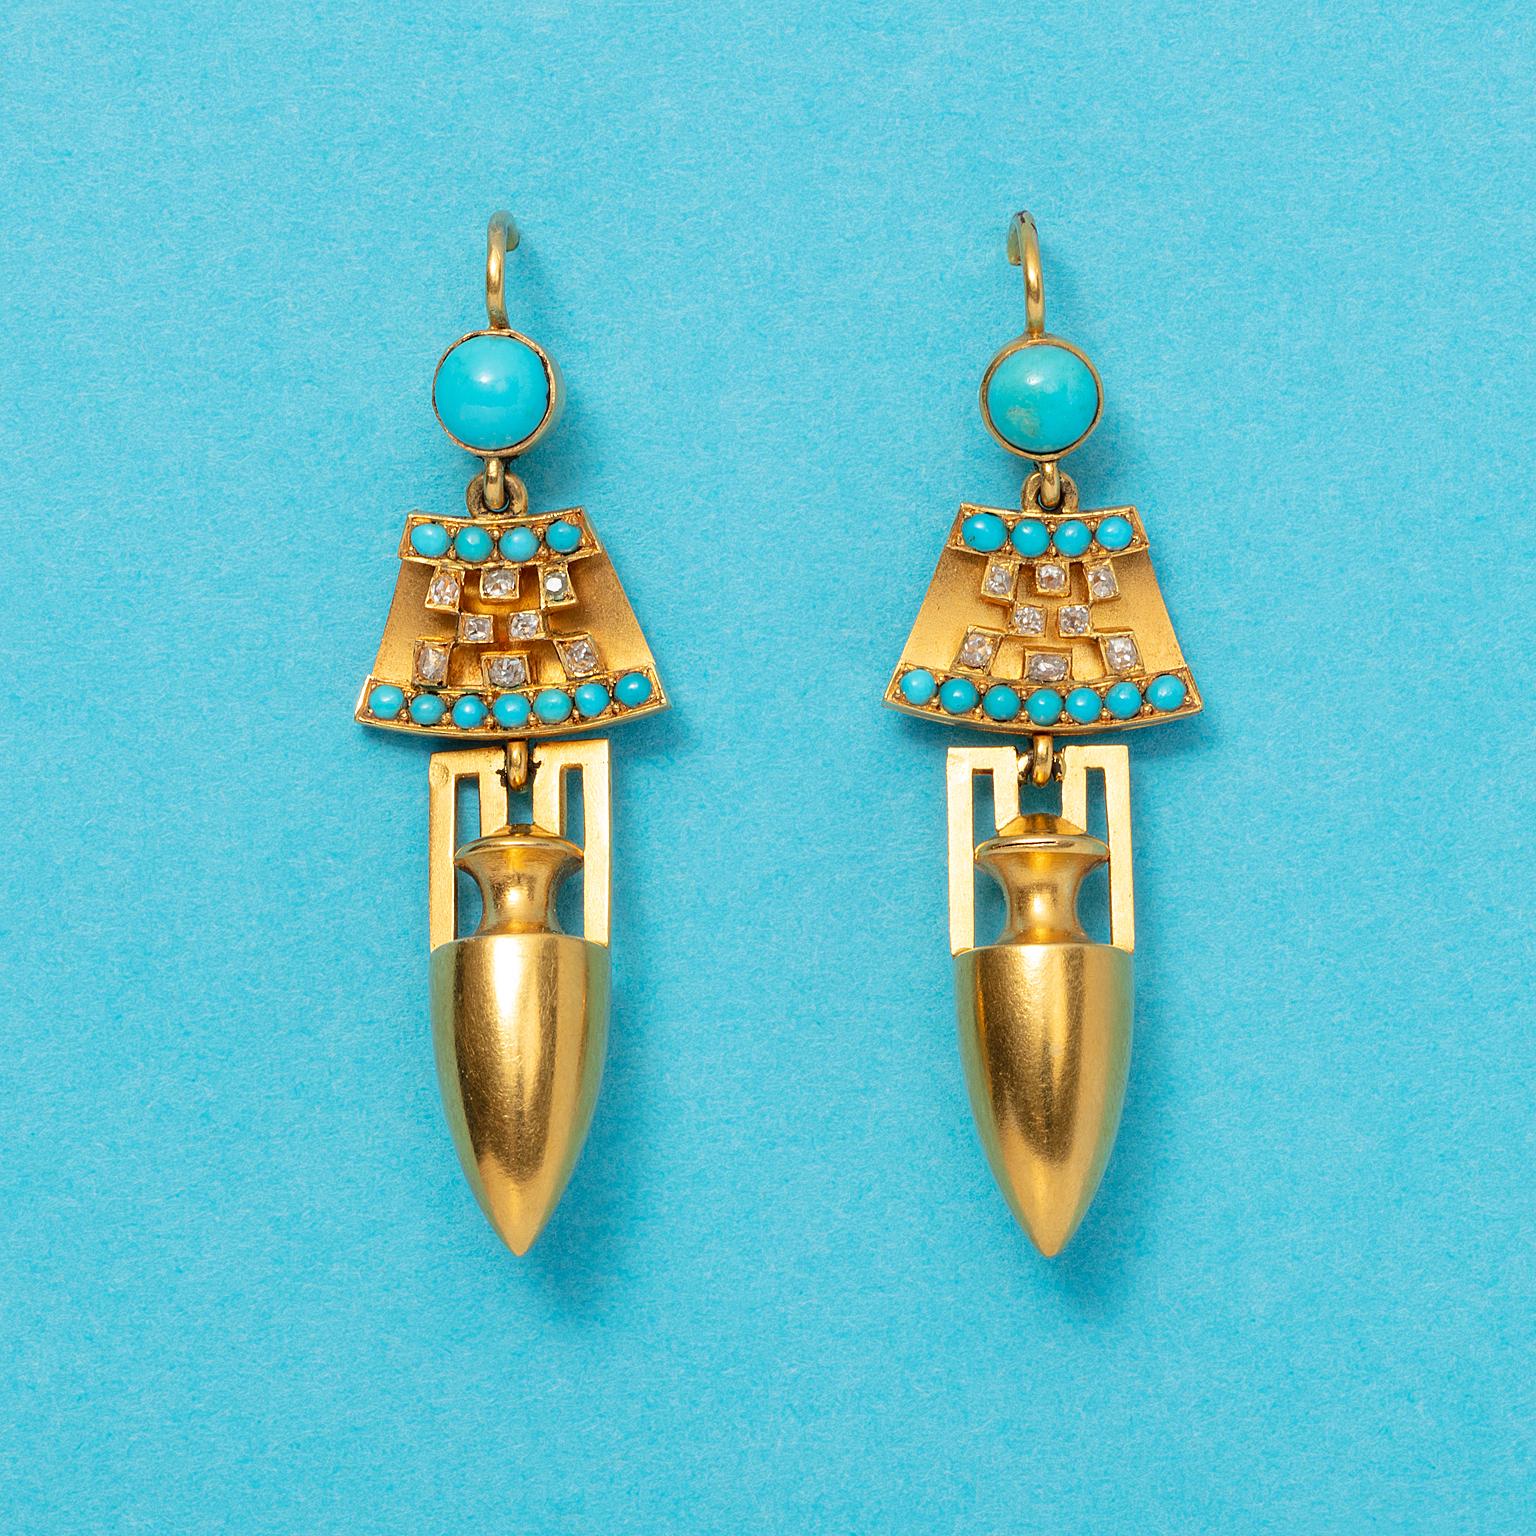 A pair of 14 or 15 carat neo-Etruscan yellow gold three-dimensional earrings set with a bezel set cabochon cut turquoise with underneath a fan shaped element set with small turquoises and diamonds from which suspends a gold amphora, England, circa